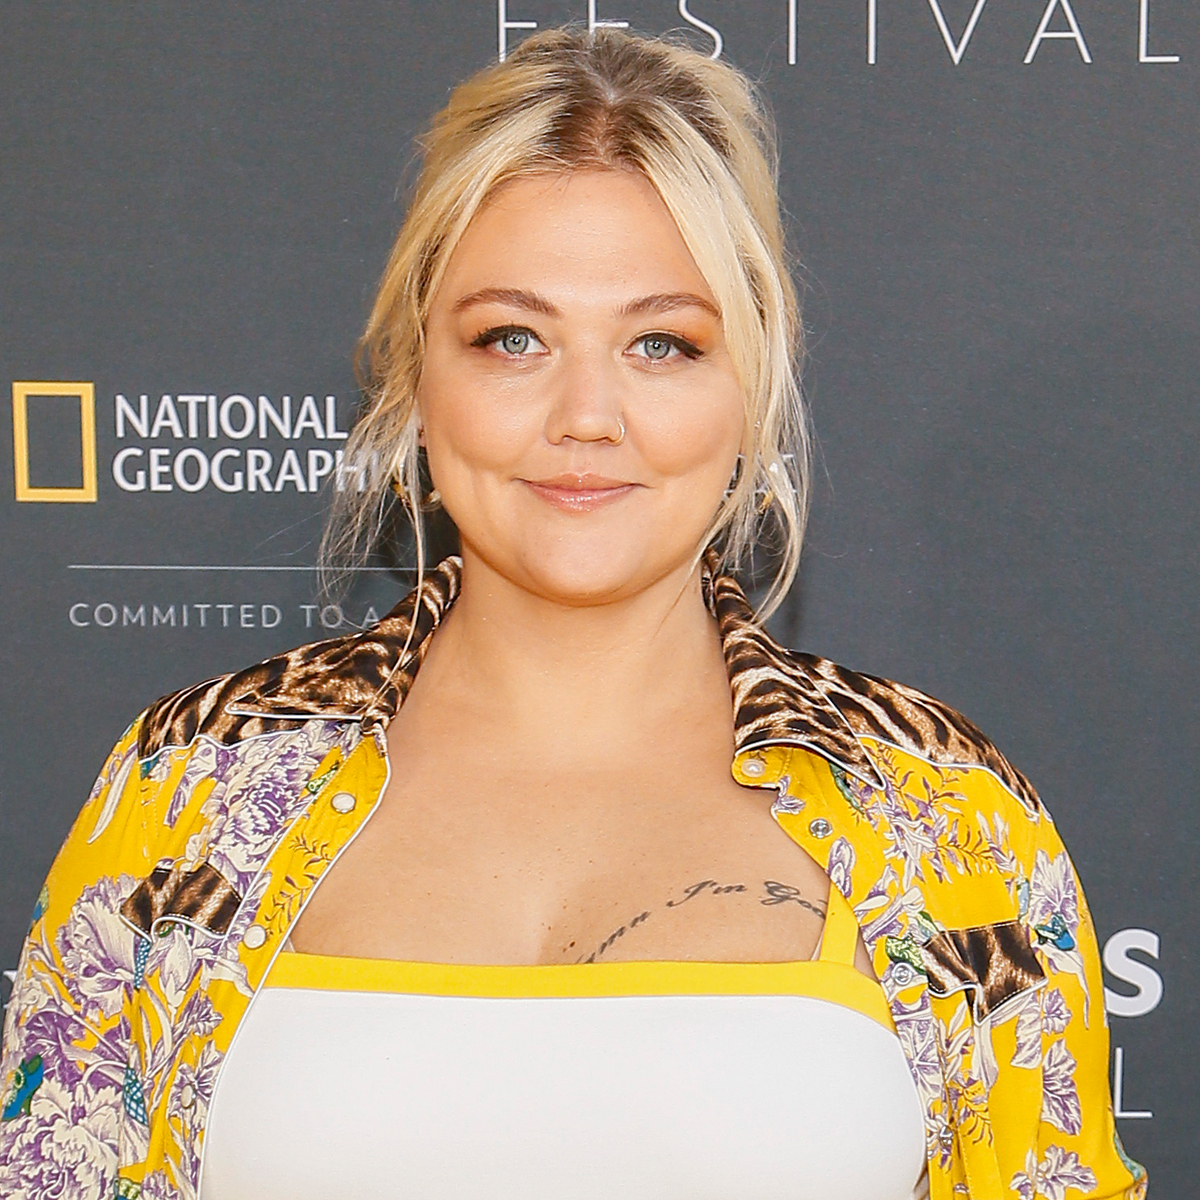 Elle King Is Pregnant After "Two Very Big Losses"